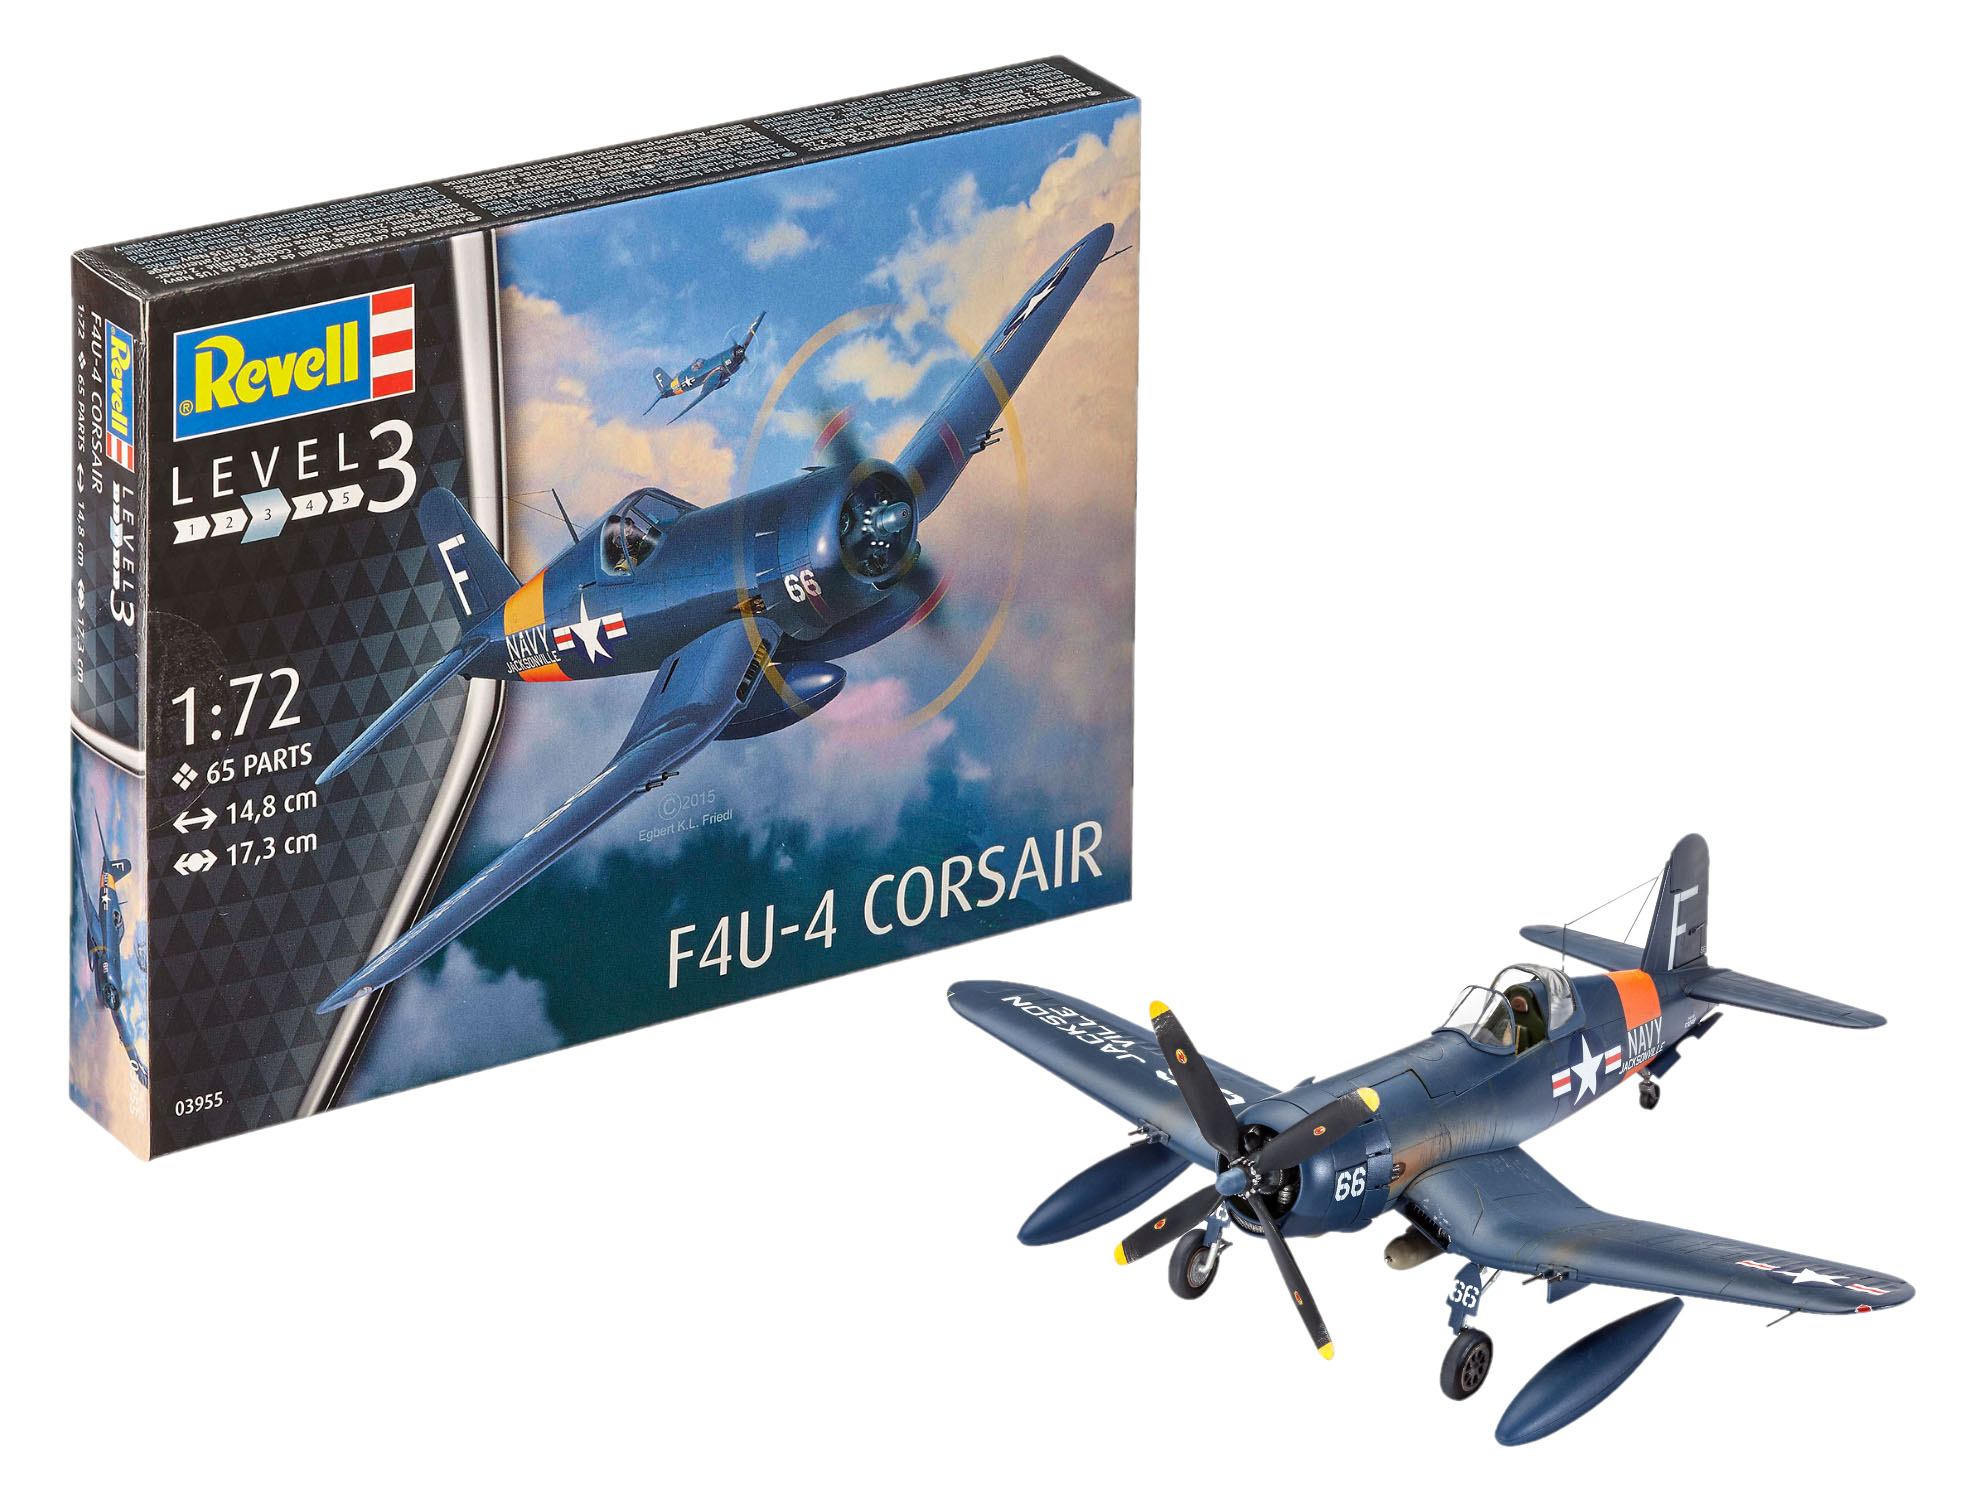 F4U-4 CORSAIR EASY ASSEMBLY AUTHENTIC KIT SCALE 1/72 HOBBY BOSS 